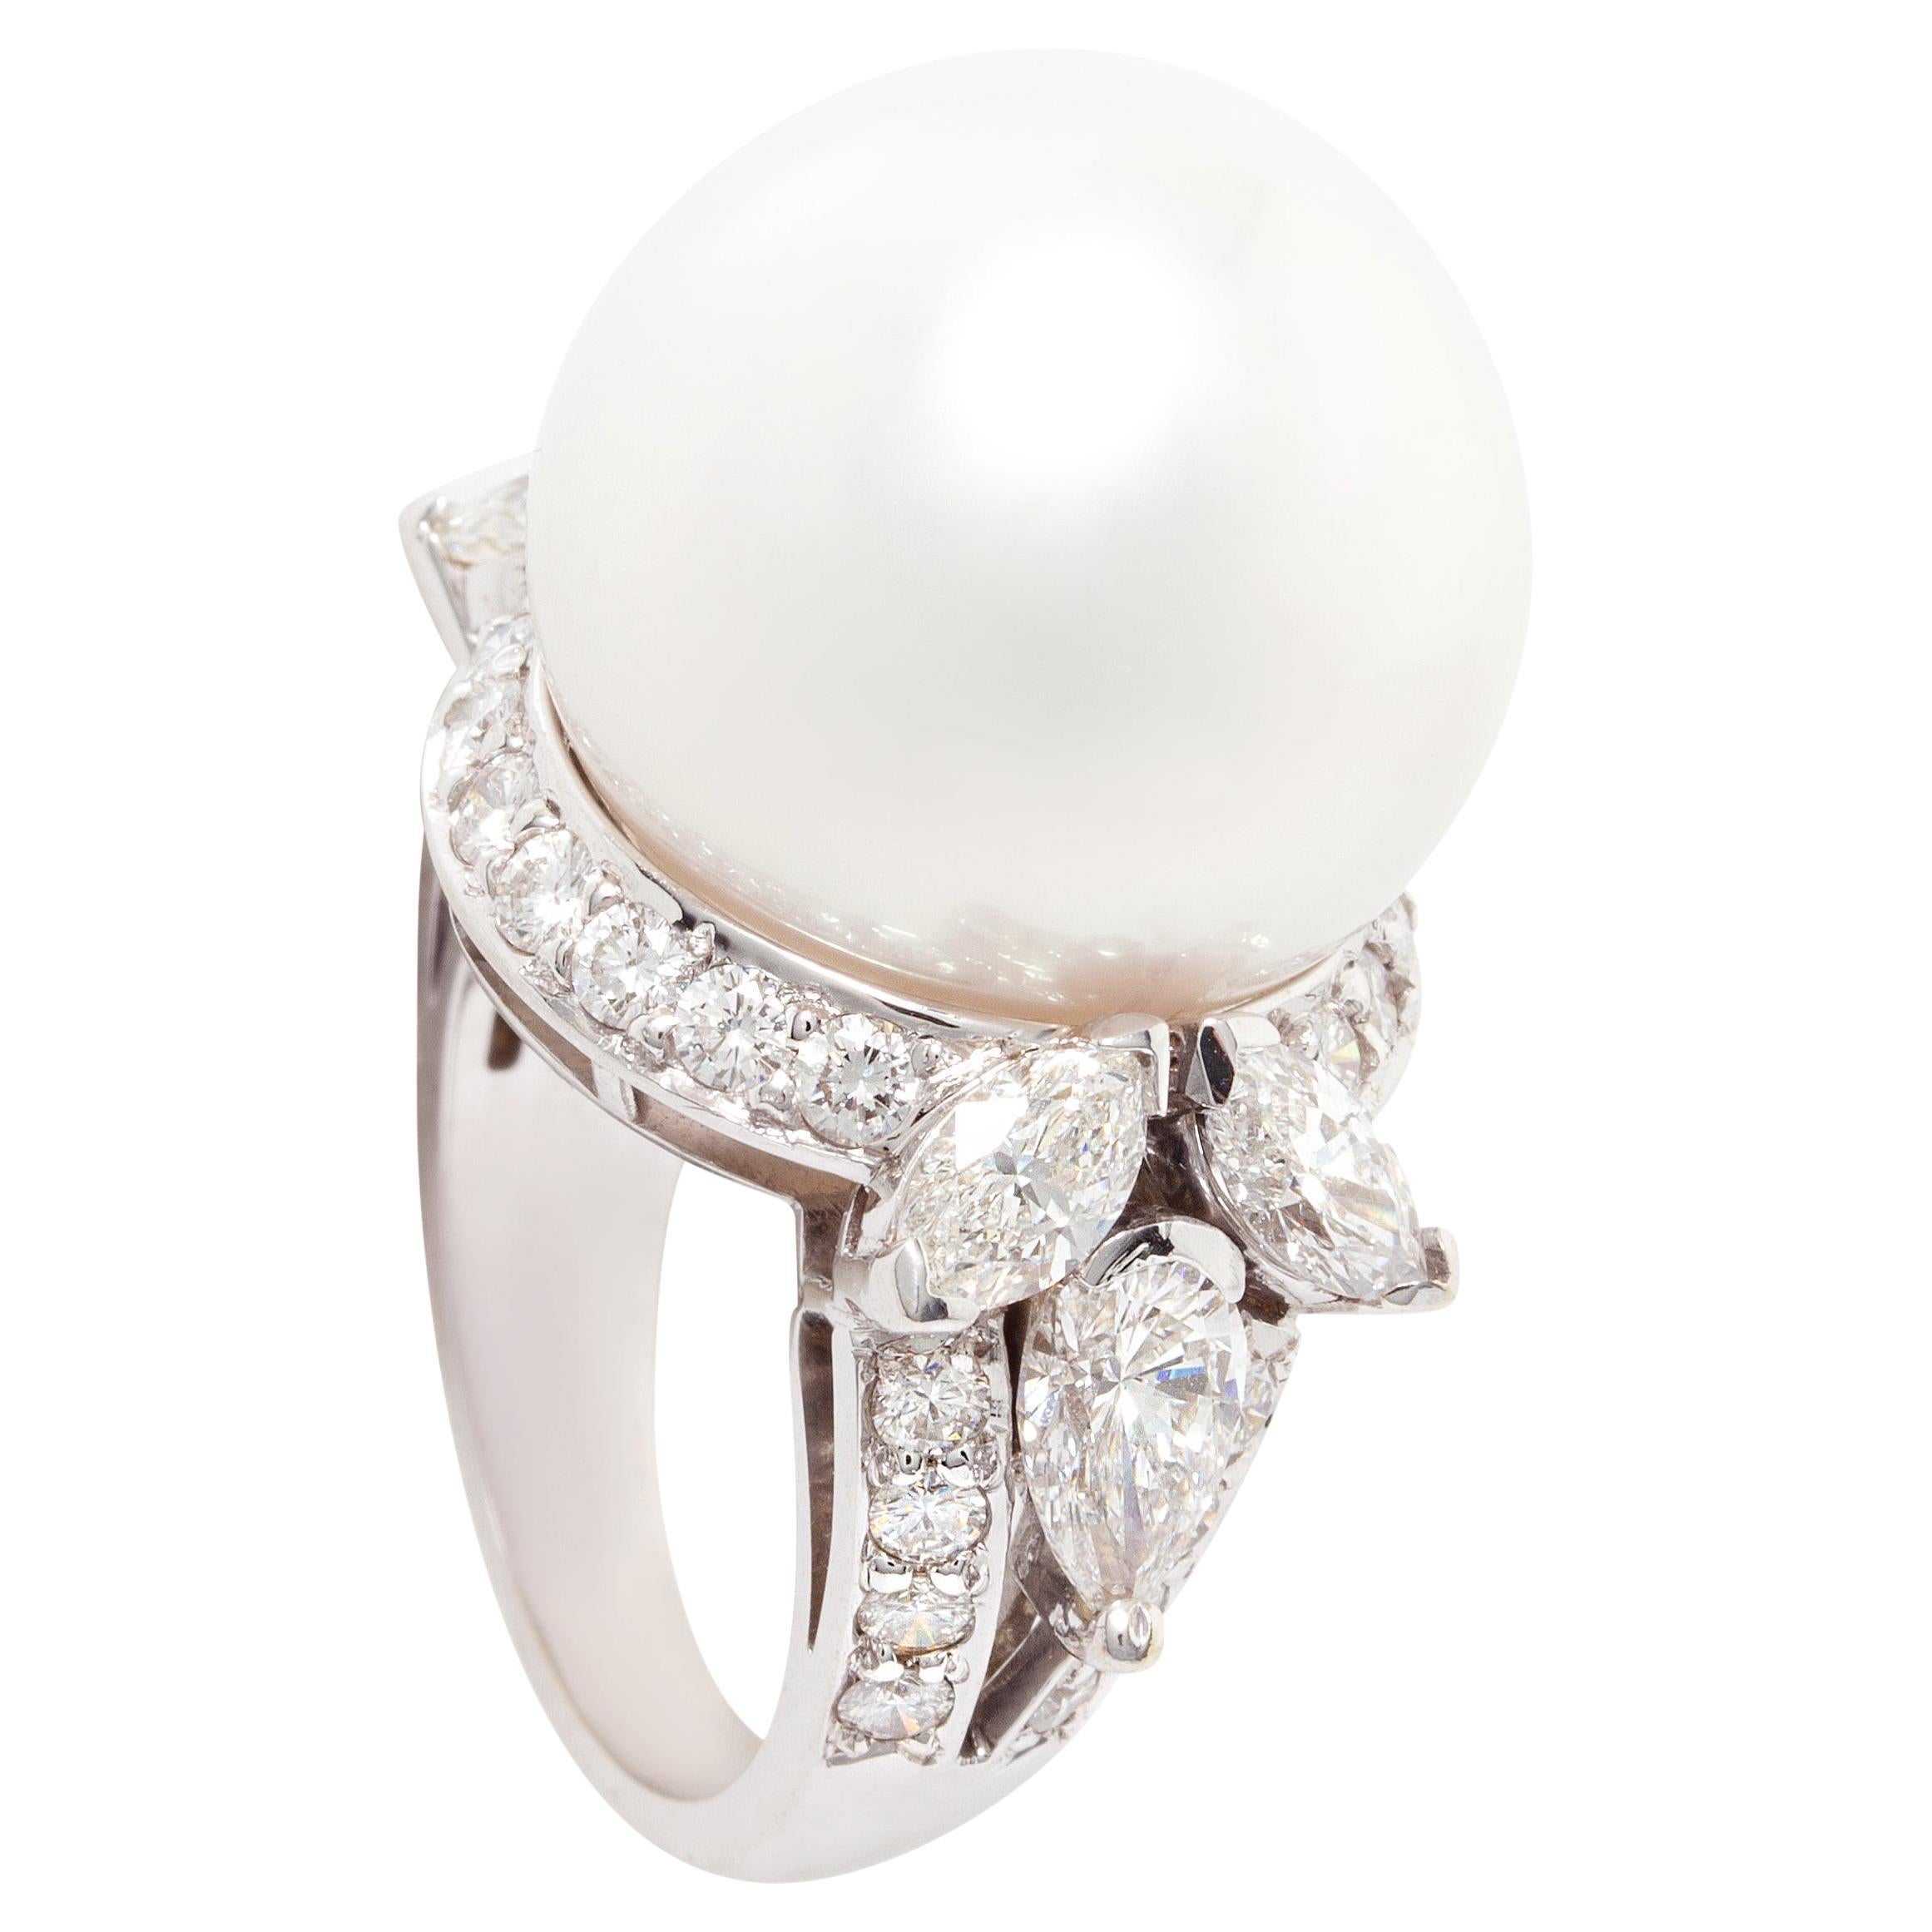 Ella Gafter 18mm South Sea Pearl Diamond Cocktail Ring